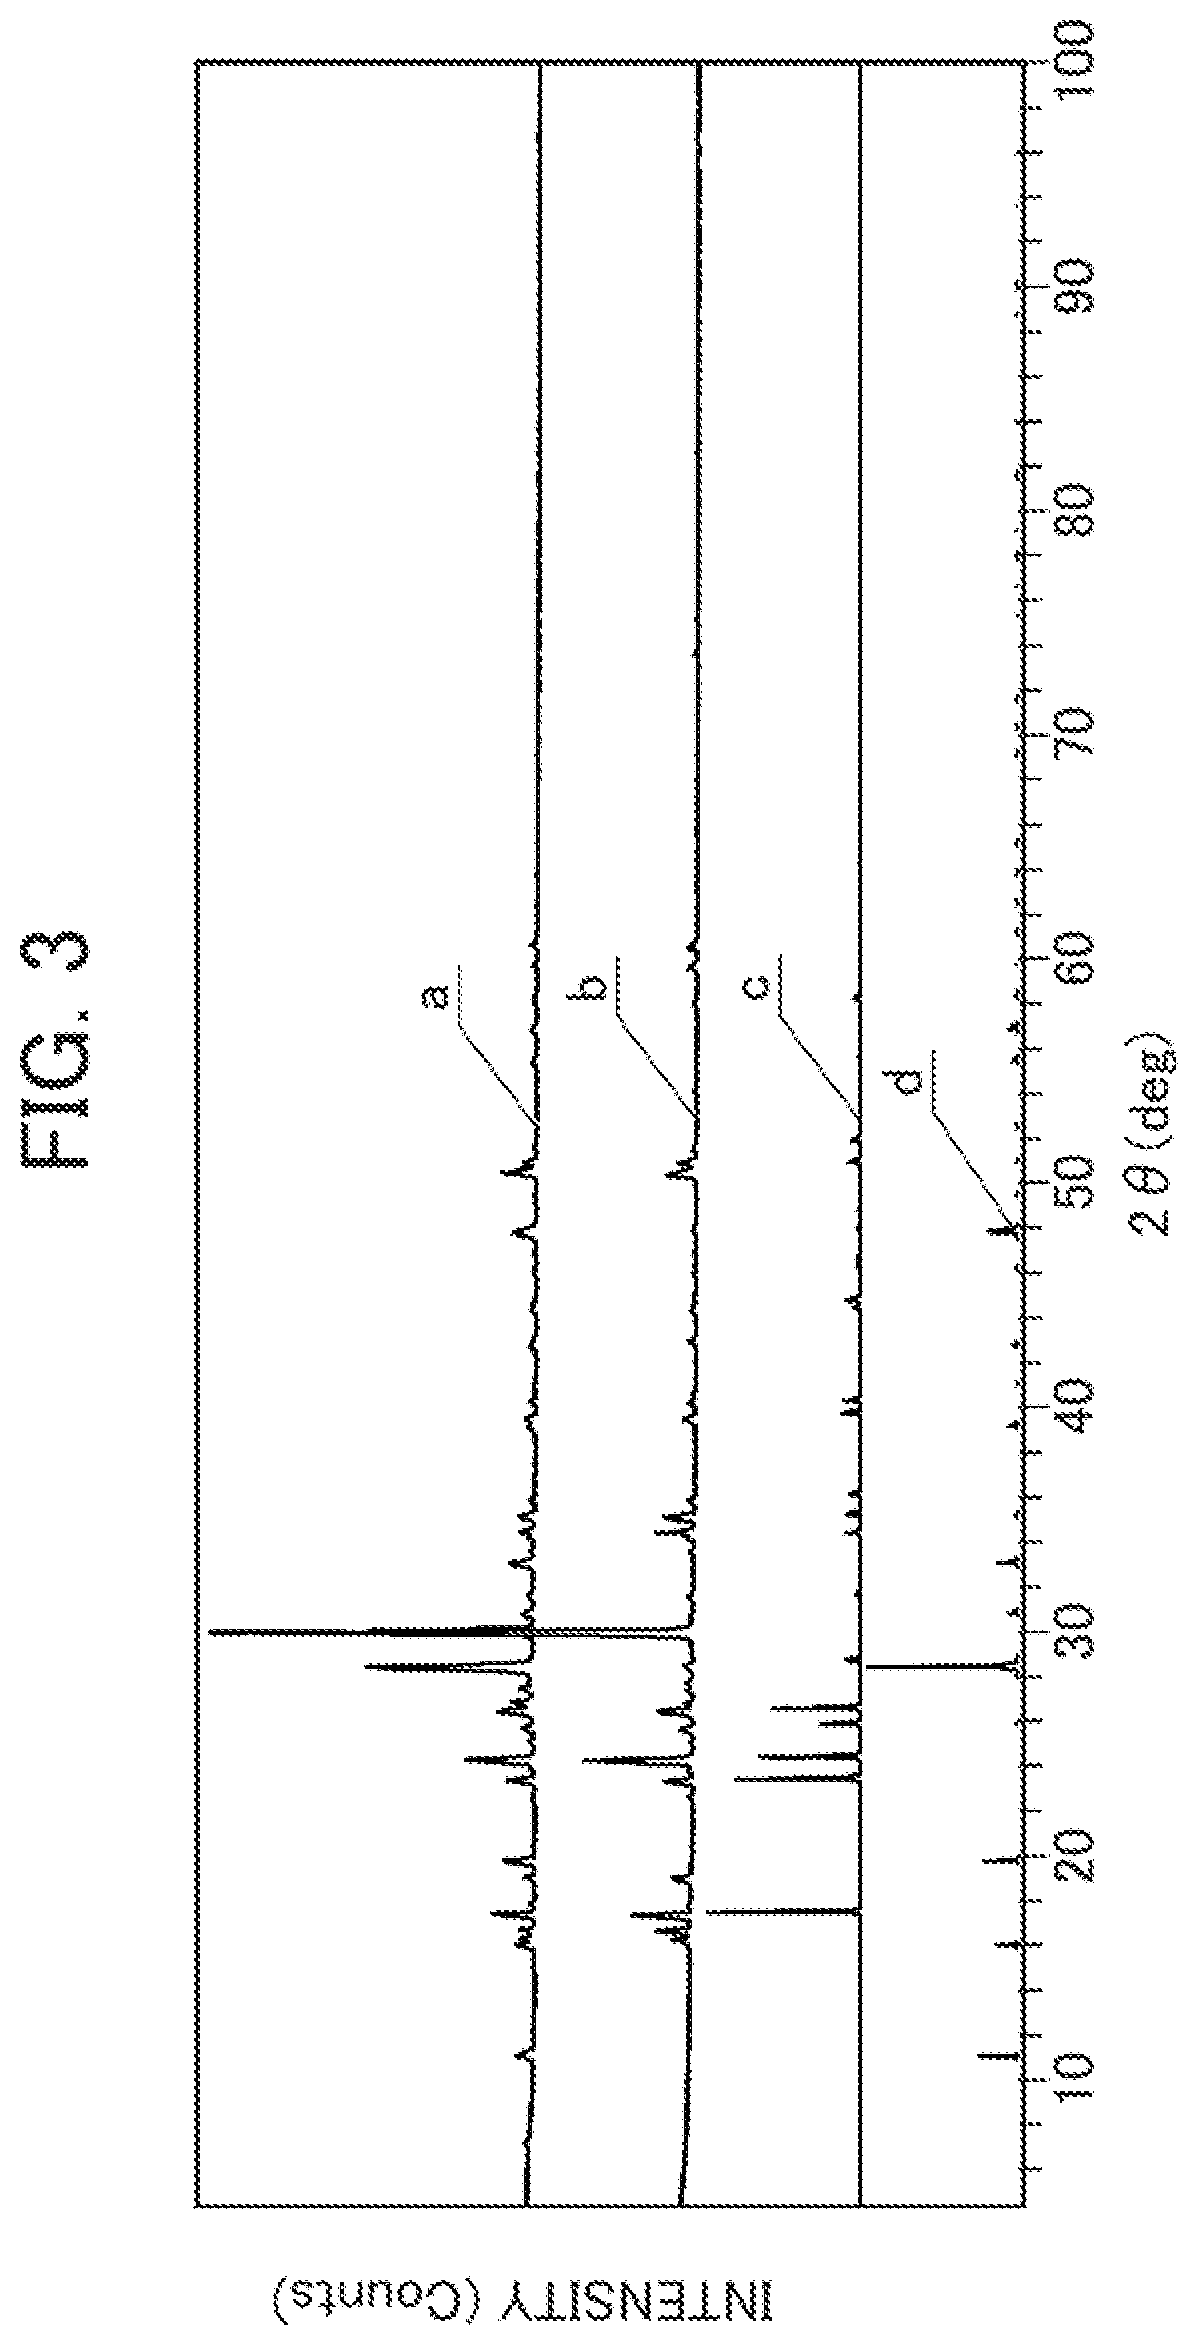 All-solid-state battery and method for manufacturing same